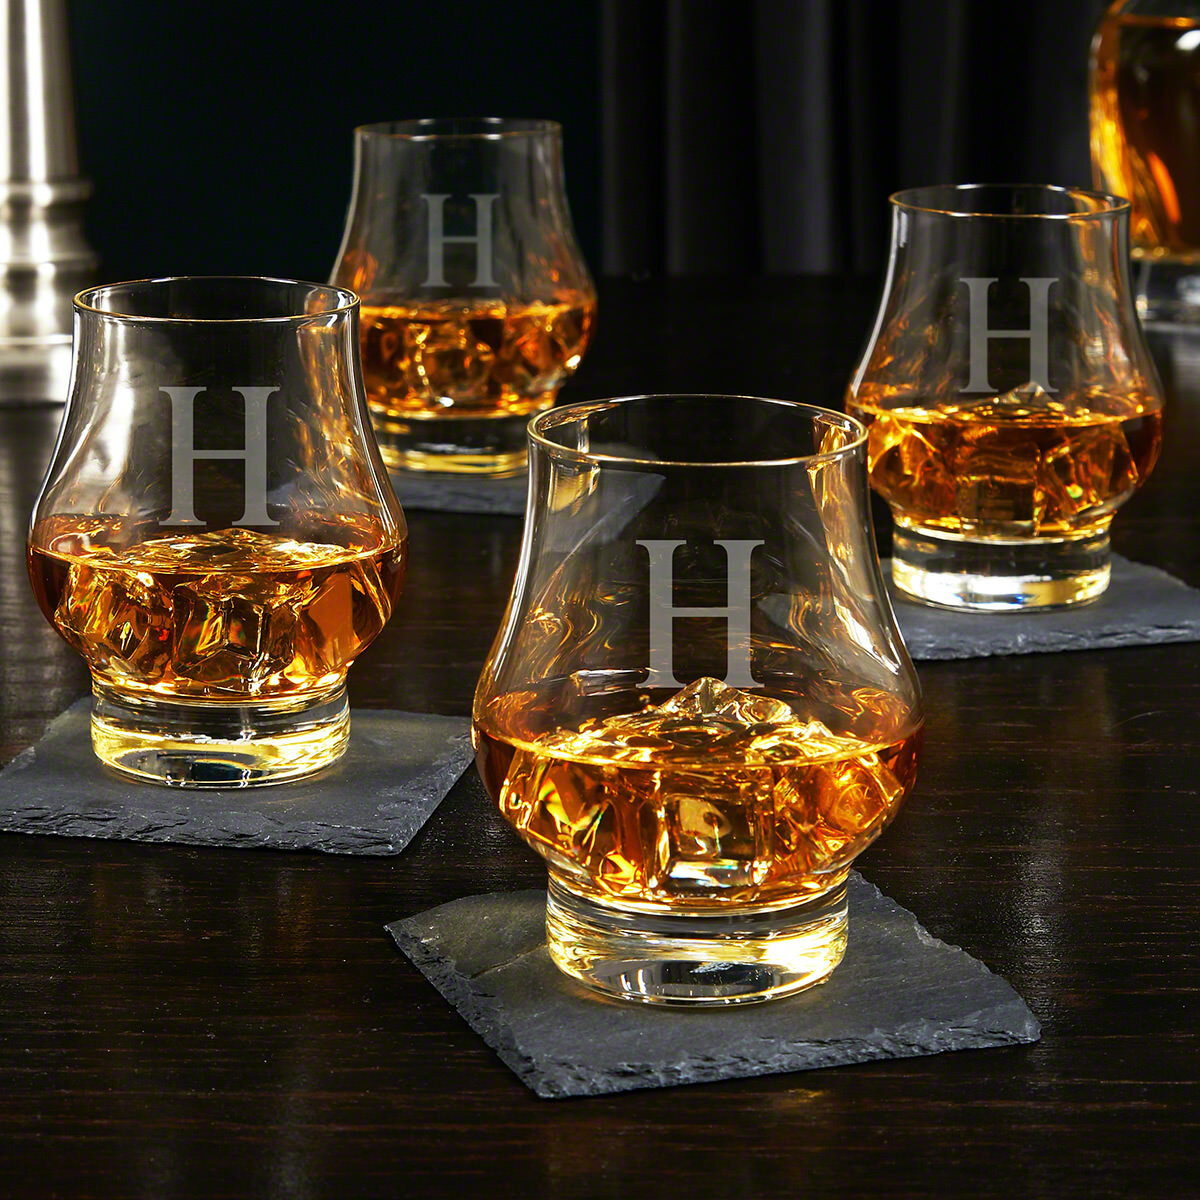 Sculpted Whiskey Glasses, Set of 4 for Whiskey Bourbon Scotch Lovers - Home Wet Bar